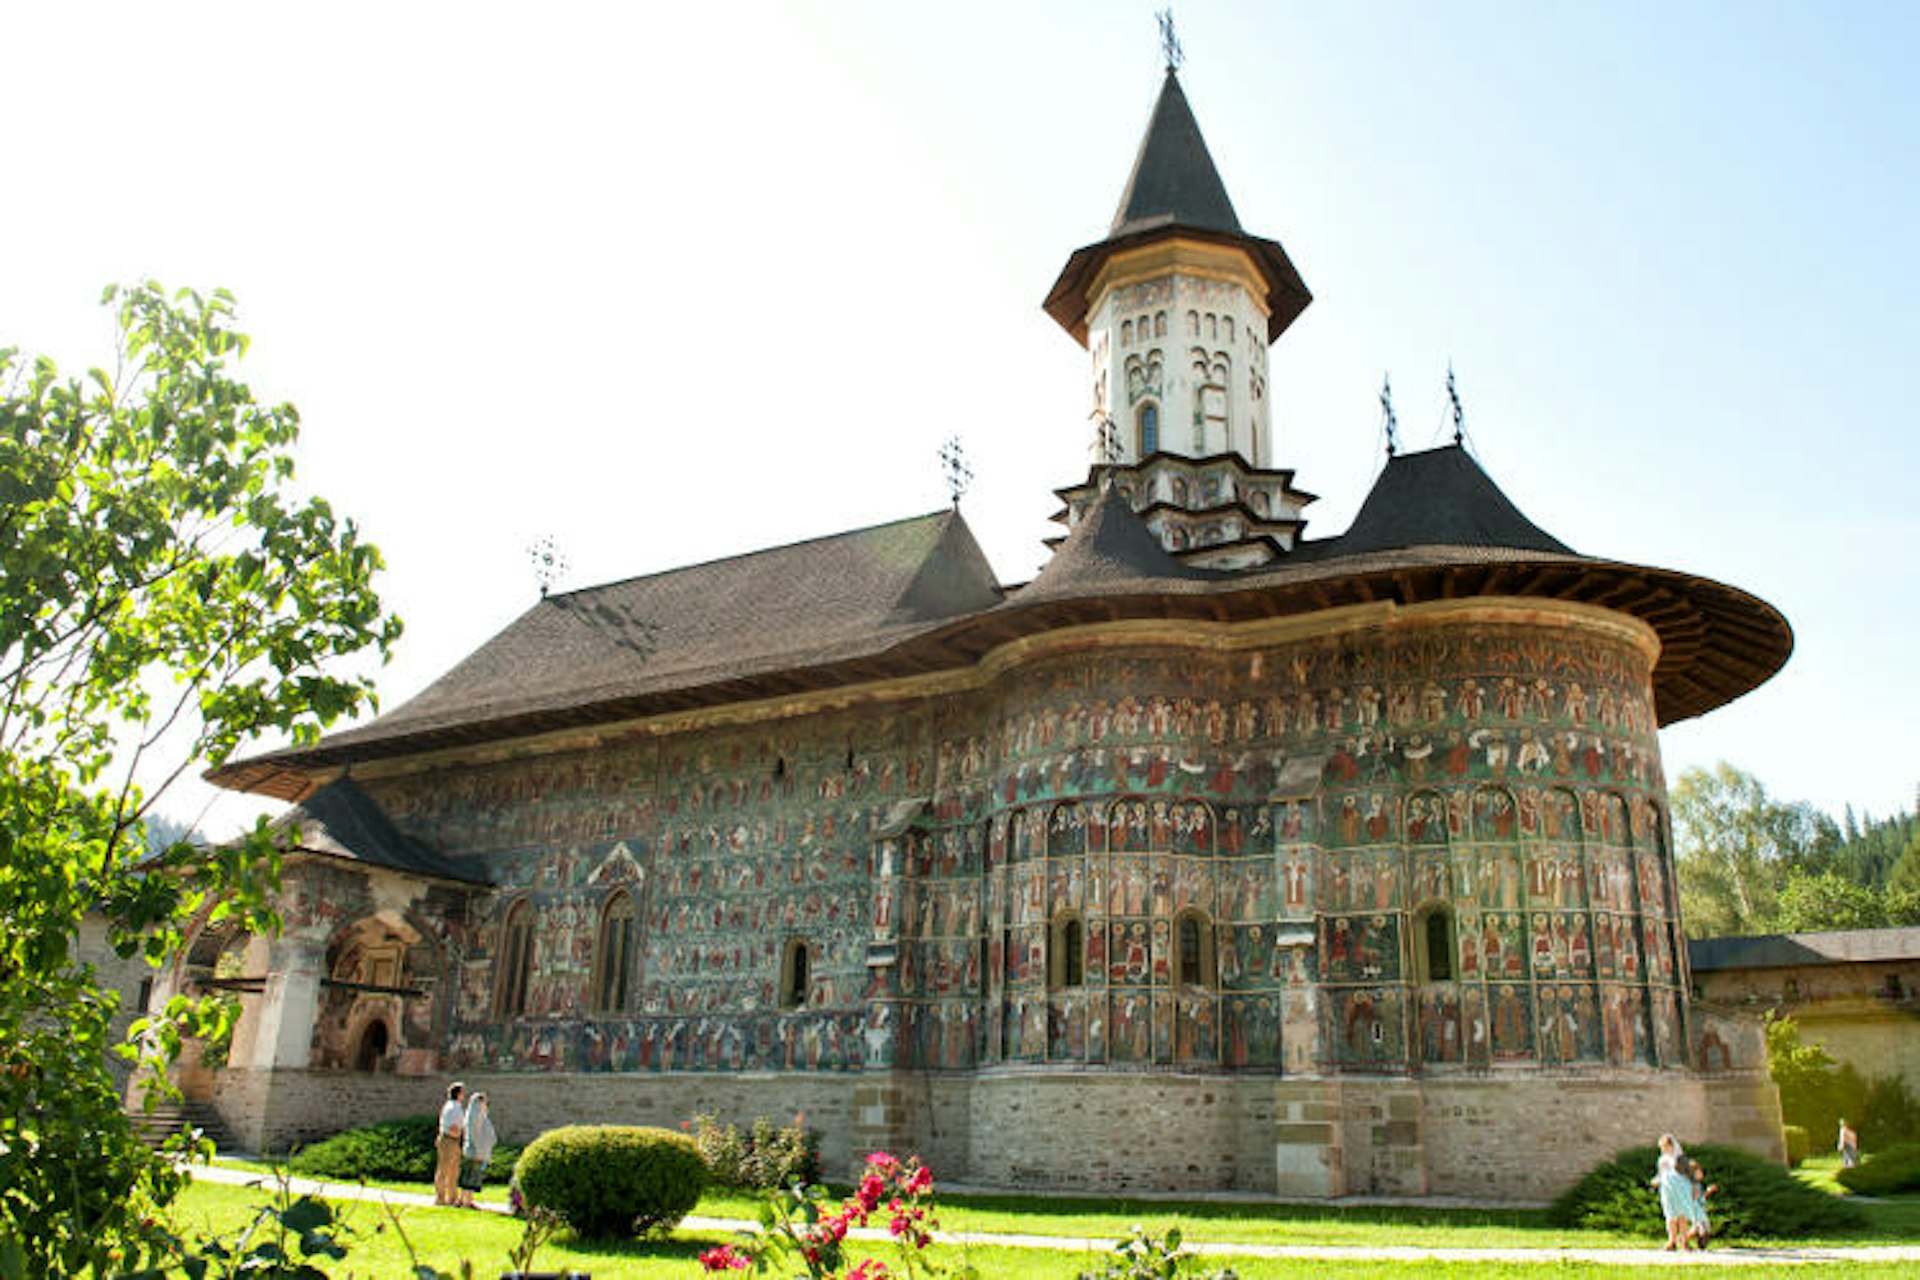 Painted Suceviţa Monastery in Southern Bucovina. Image by ralucahphotography.ro / Getty Images